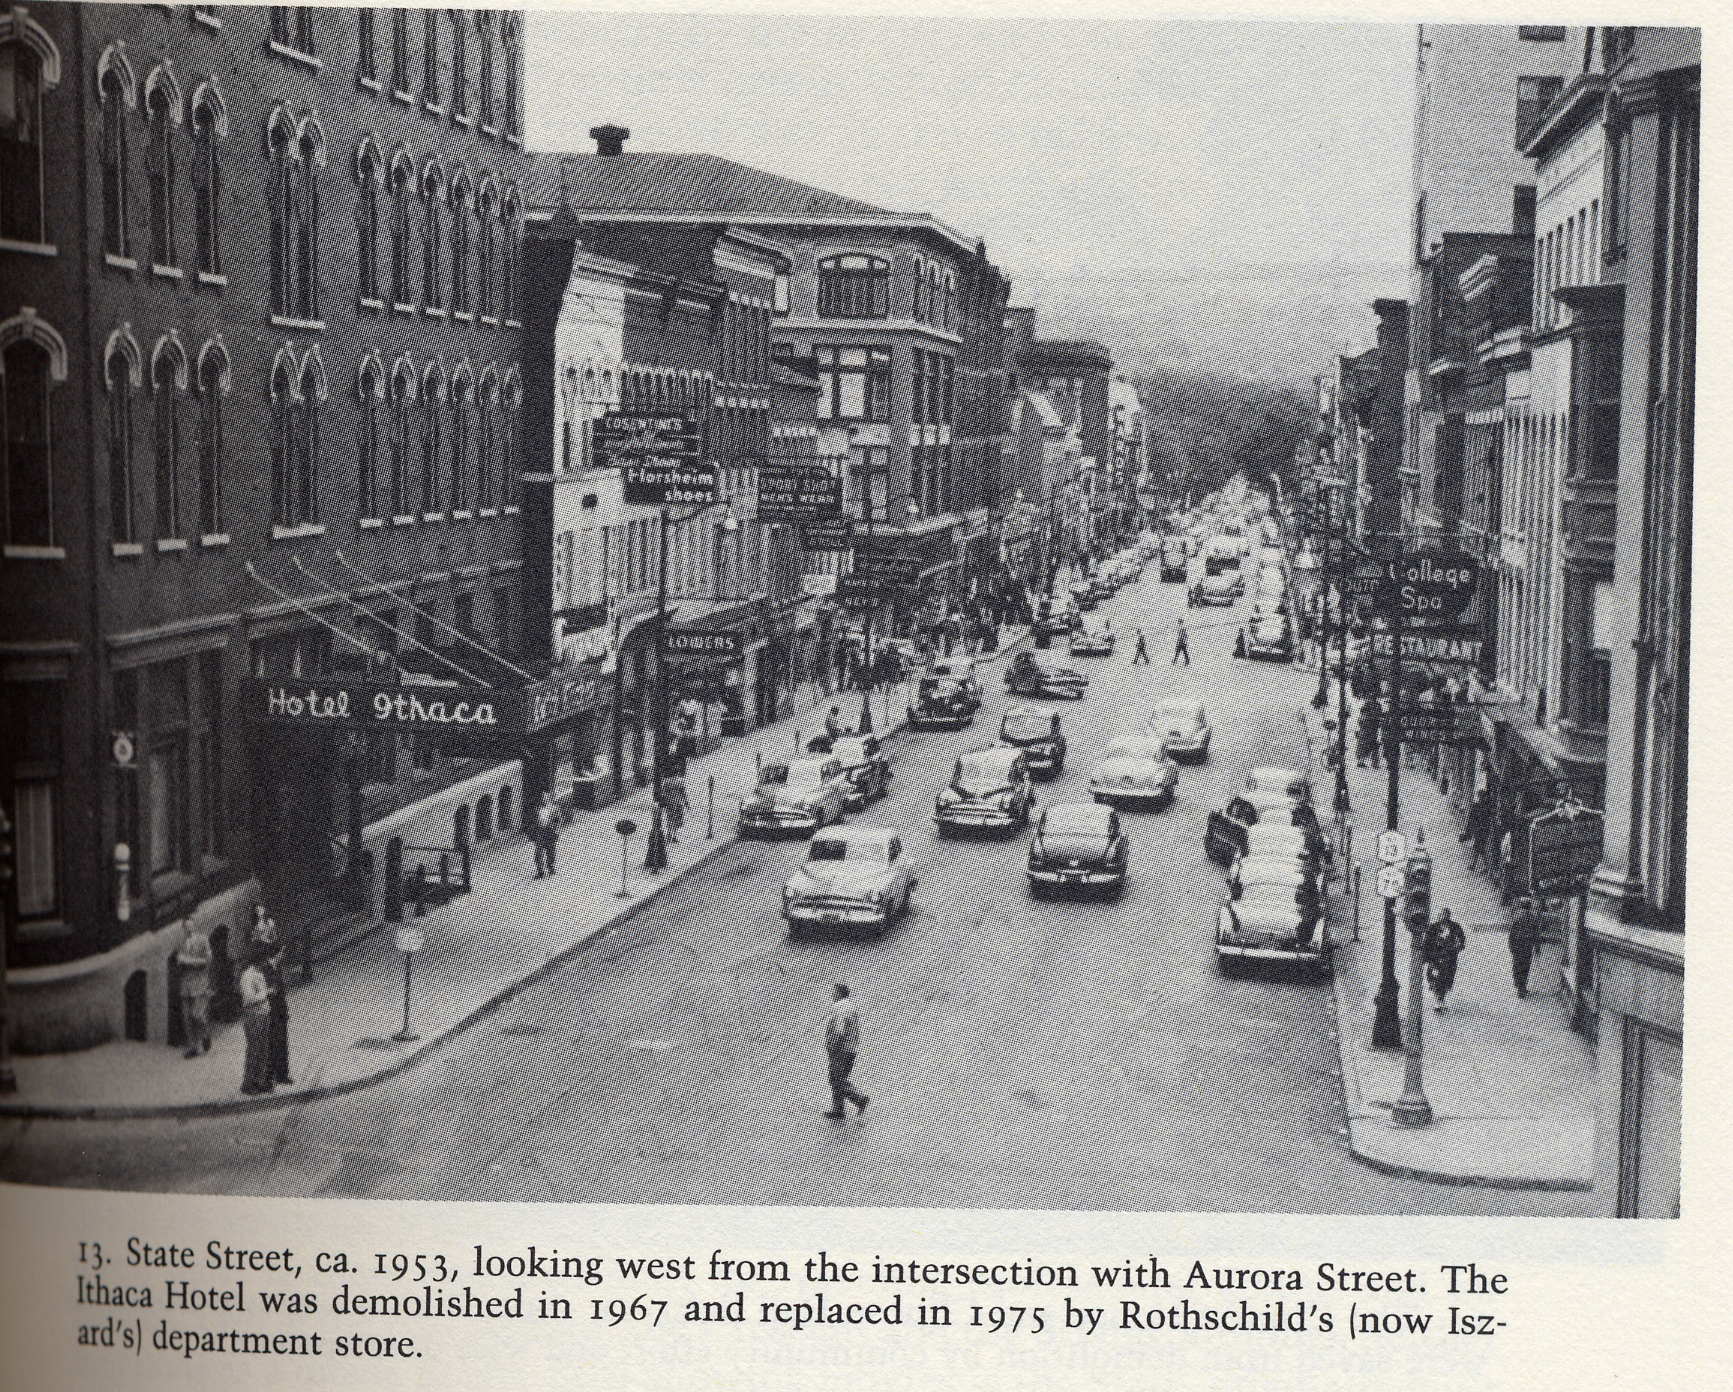 Downtown Ithaca in 1953